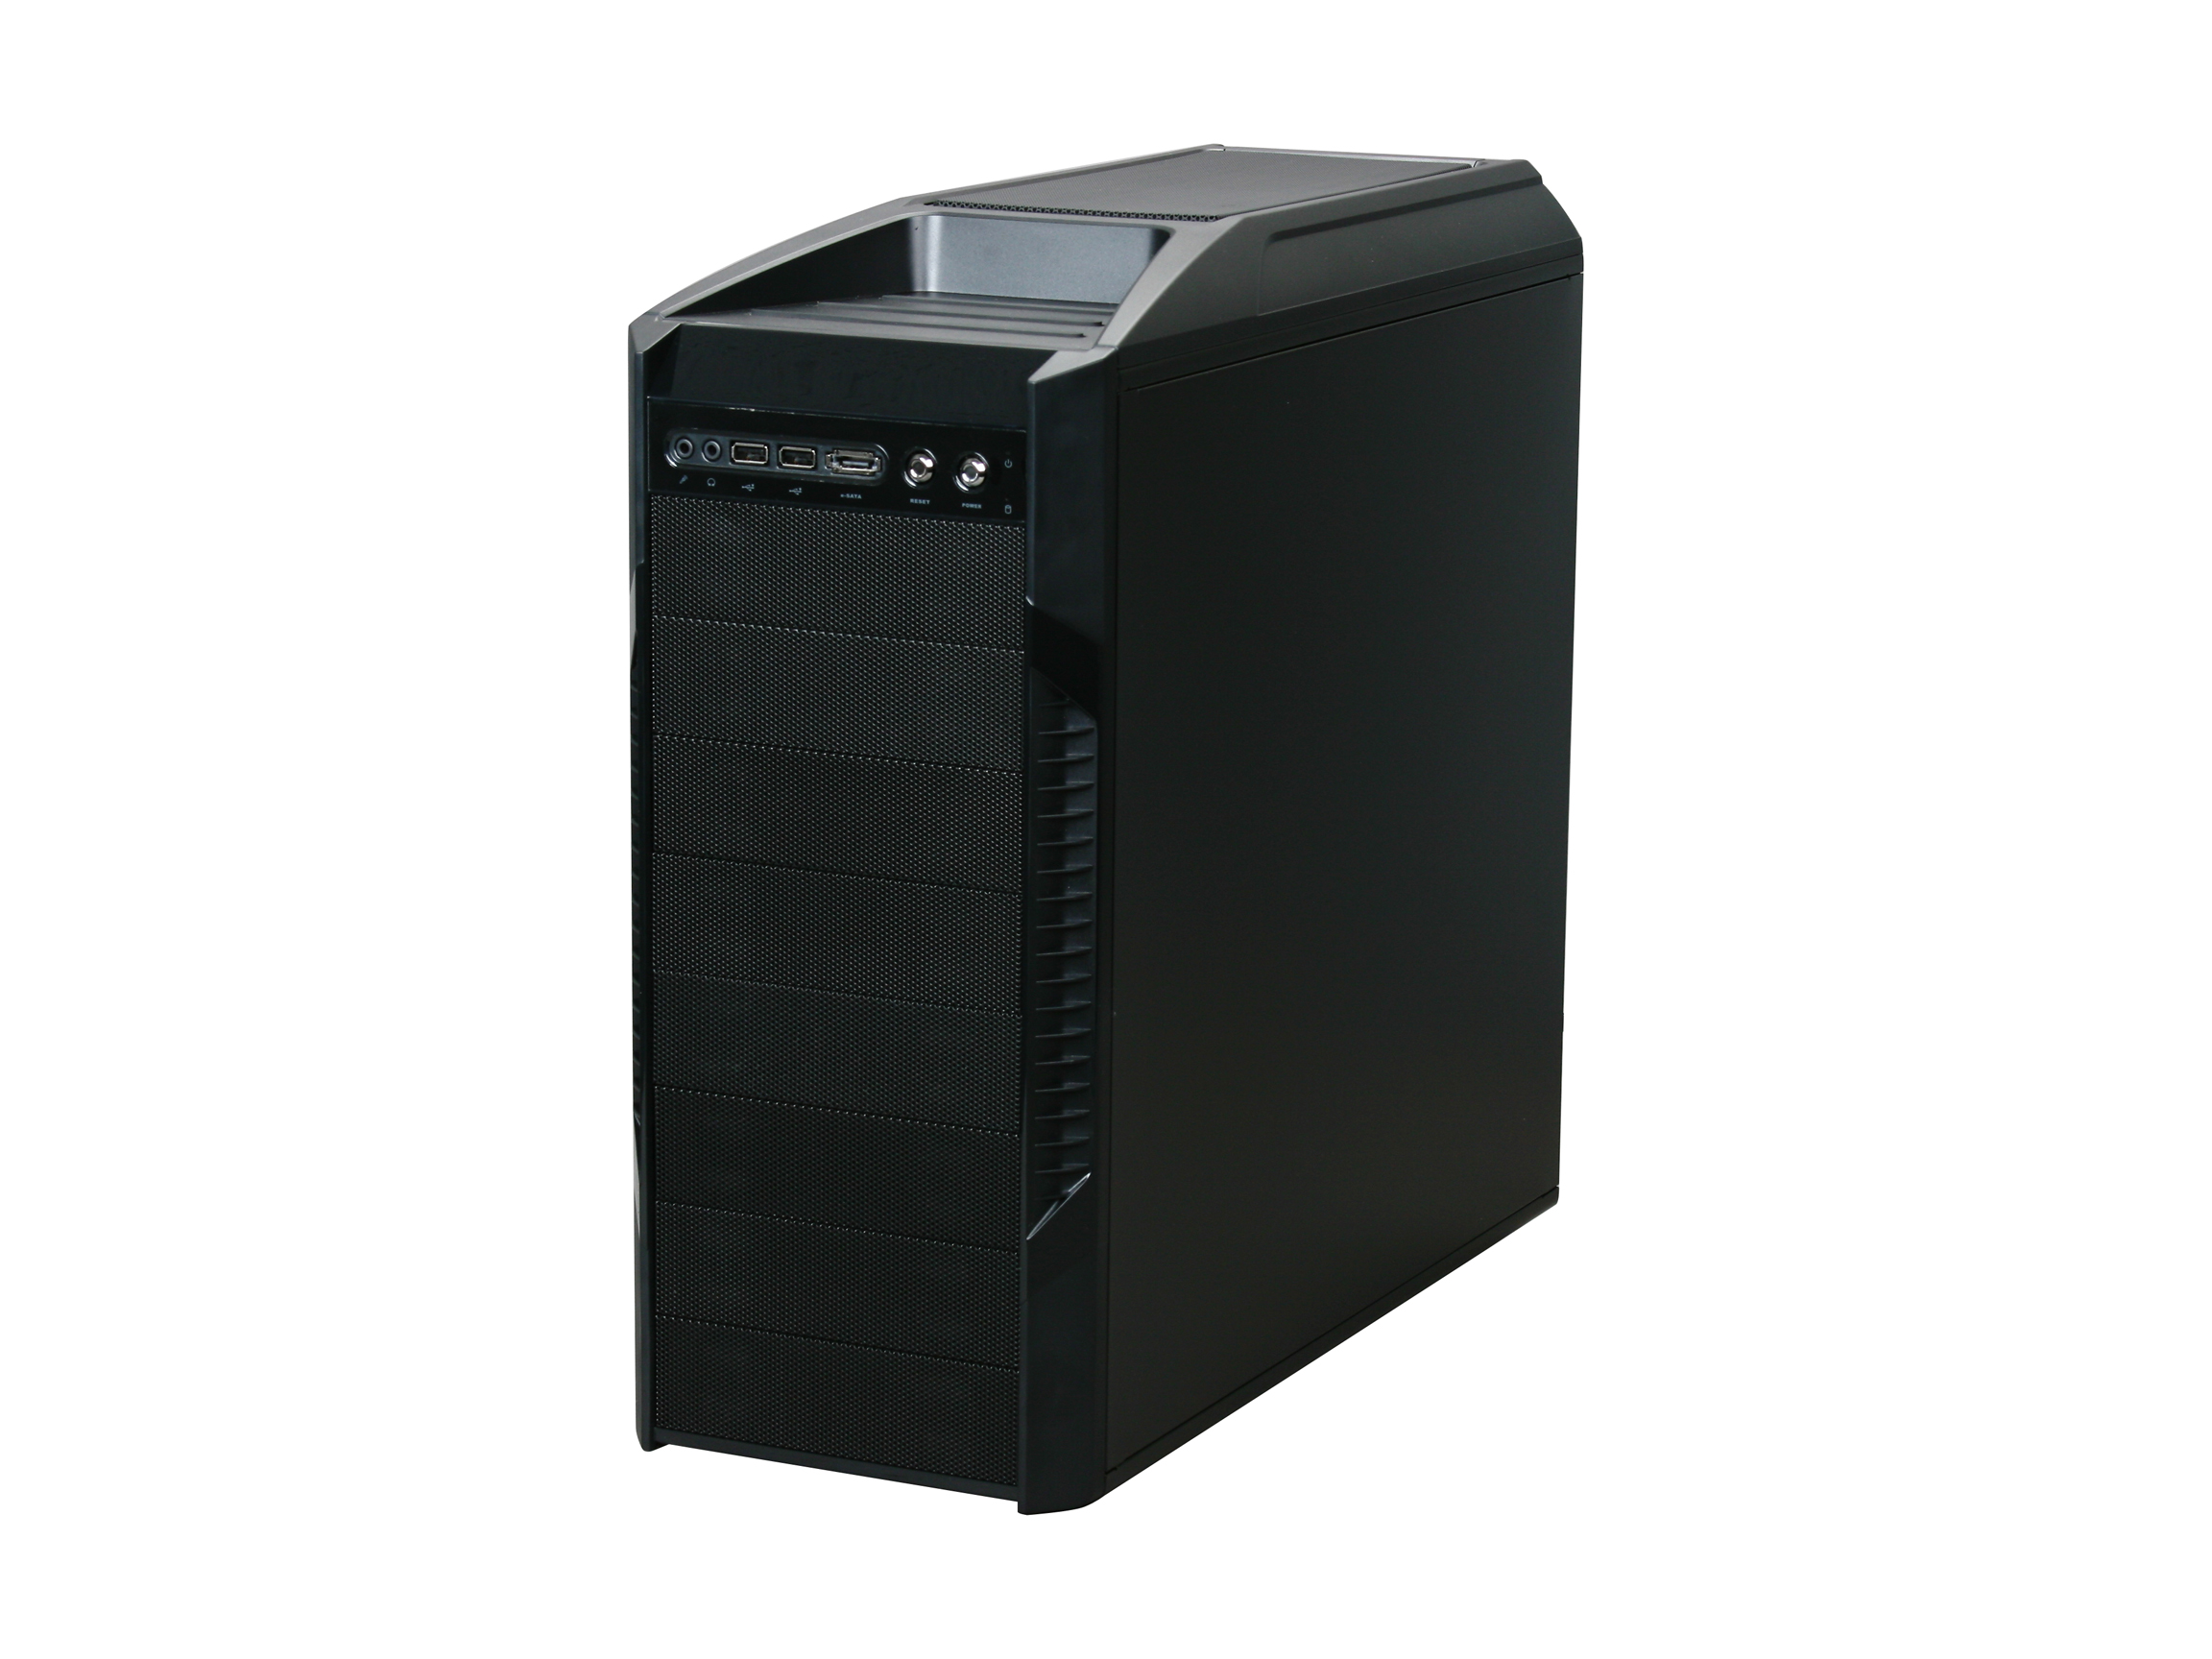 Rosewill DESTROYER Black Gaming ATX Mid Tower Computer Case, comes with Three Fans 1x Front Blue LED 120mm Fan, 1x Top 120mm Fan, 1x Rear 120mm Fan, option Fans 2x Side 120mm Fan, 1x Top 120mm Fan, 1x